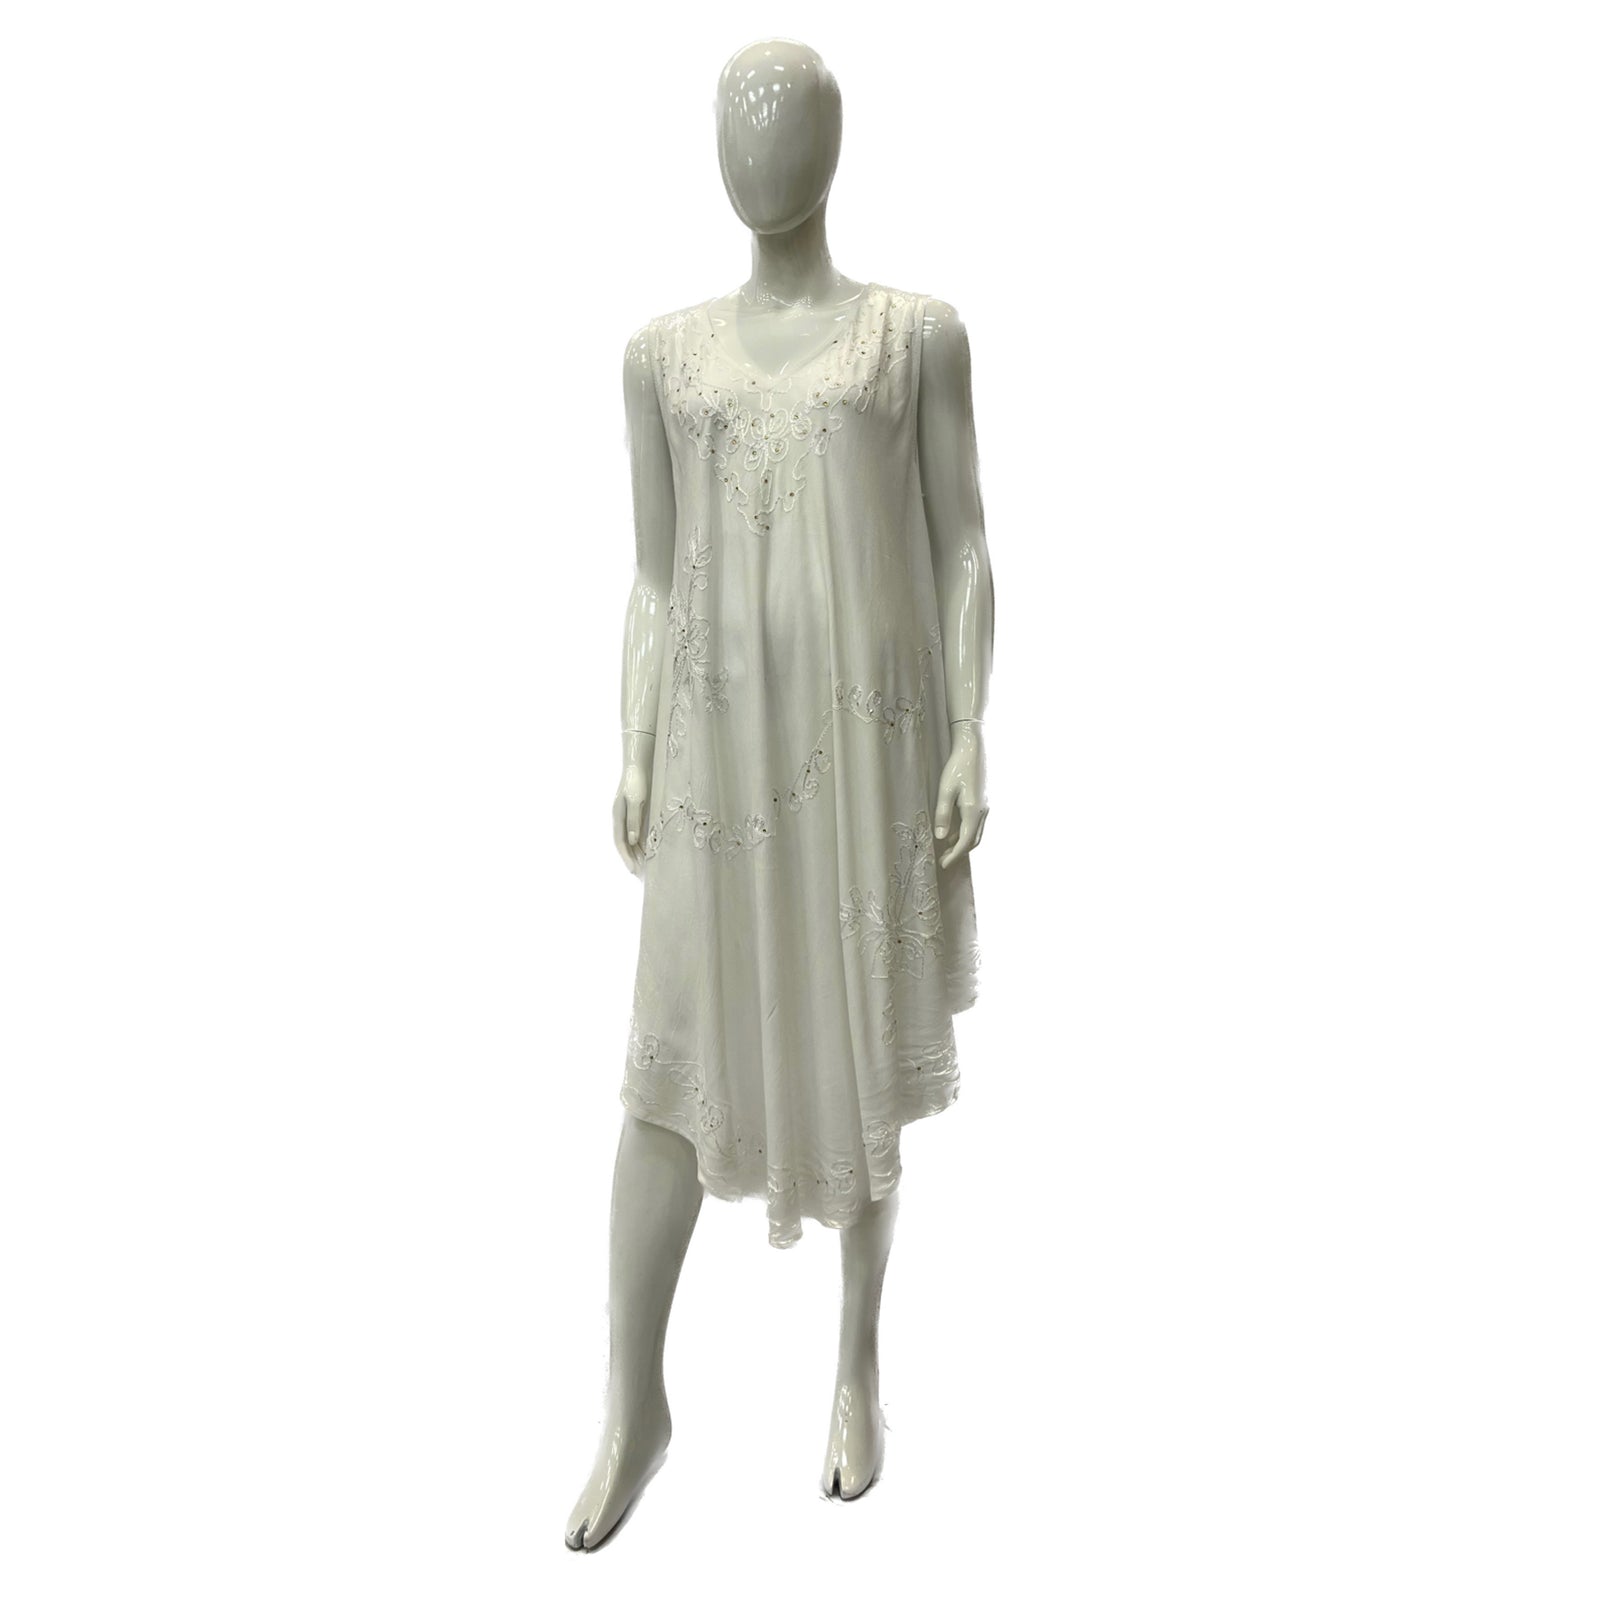 Wholesale Women's Dresses Rayon Solid White withEmbedded Sl U Gown 6-48 Case S-XL 140Gms 1C Aya NWr6